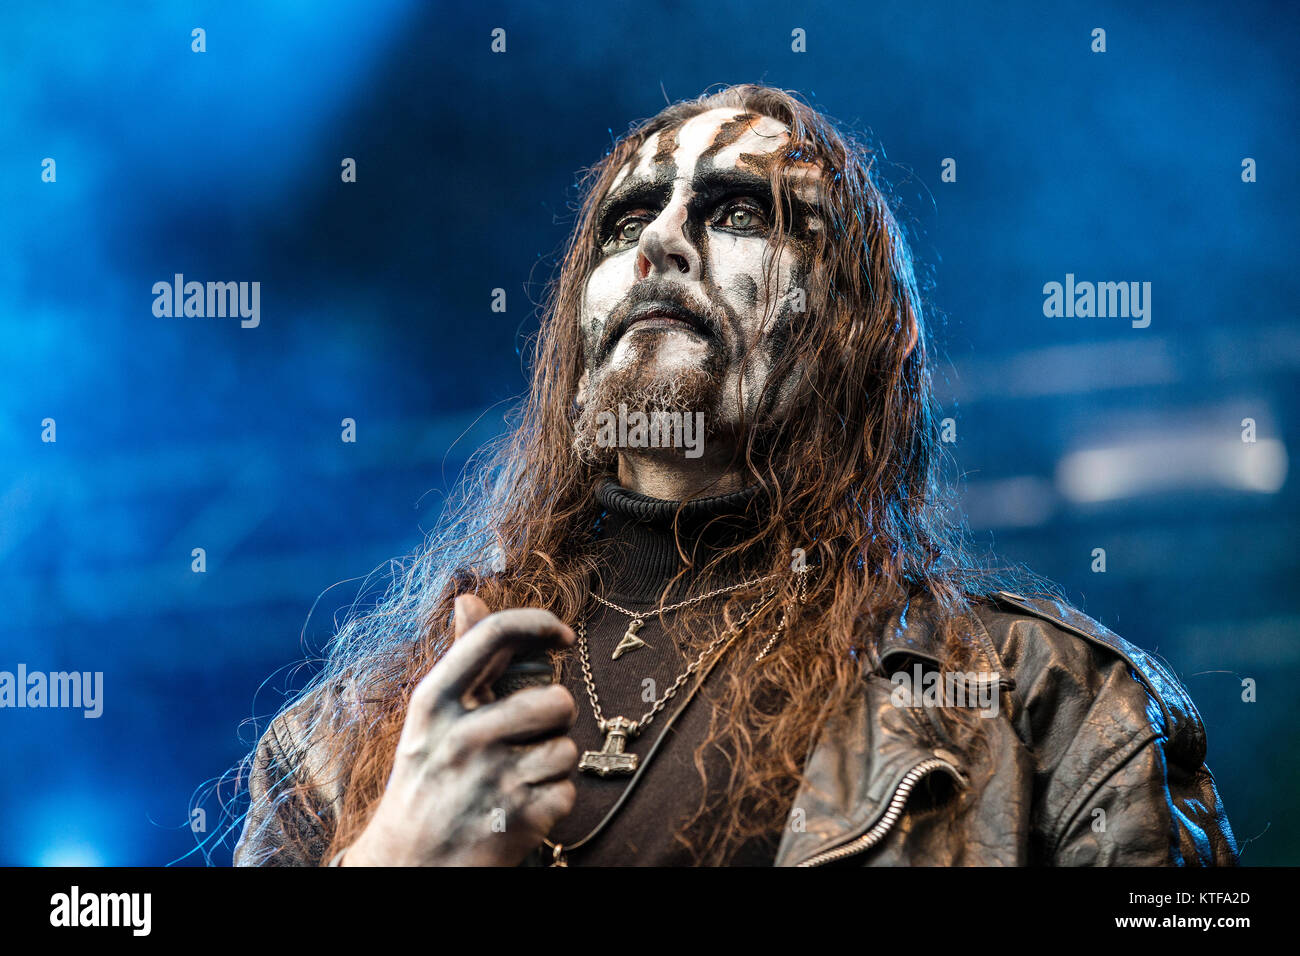 Norway, Borre – August 18, 2017. The Norwegian black metal band Gaahls Wyrd performs a live concert during the Norwegian metal festival Midgardsblot Festival 2017 in Borre. Here vocalist Gaahl is seen live on stage. (Photocredit: Terje Dokken). Stock Photo